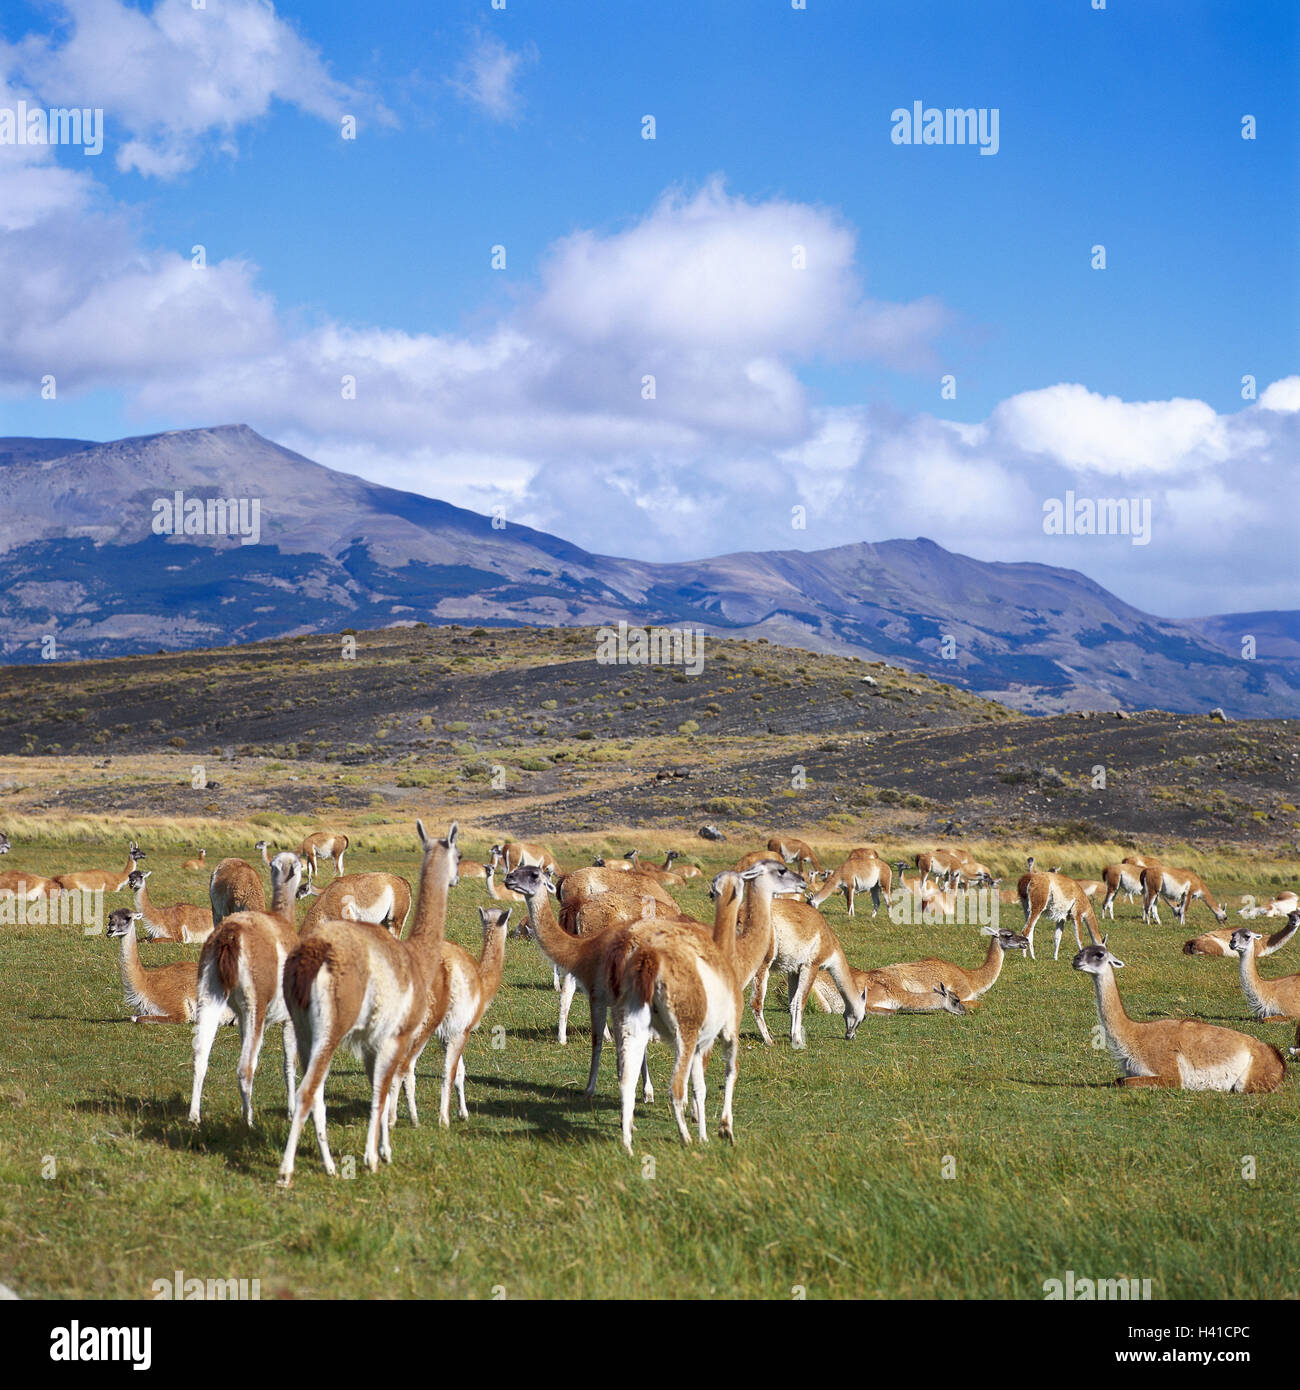 Chile, Patagonia, Torres del Paine Nationalpark, Guanakos, lama, guanacoe South America, Torres del Paine, national park, scenery, animals, animal world, Wildlife, wild animals, mammals, cloven-hoofed animals, Schwielensohler, new world camels, new world Stock Photo